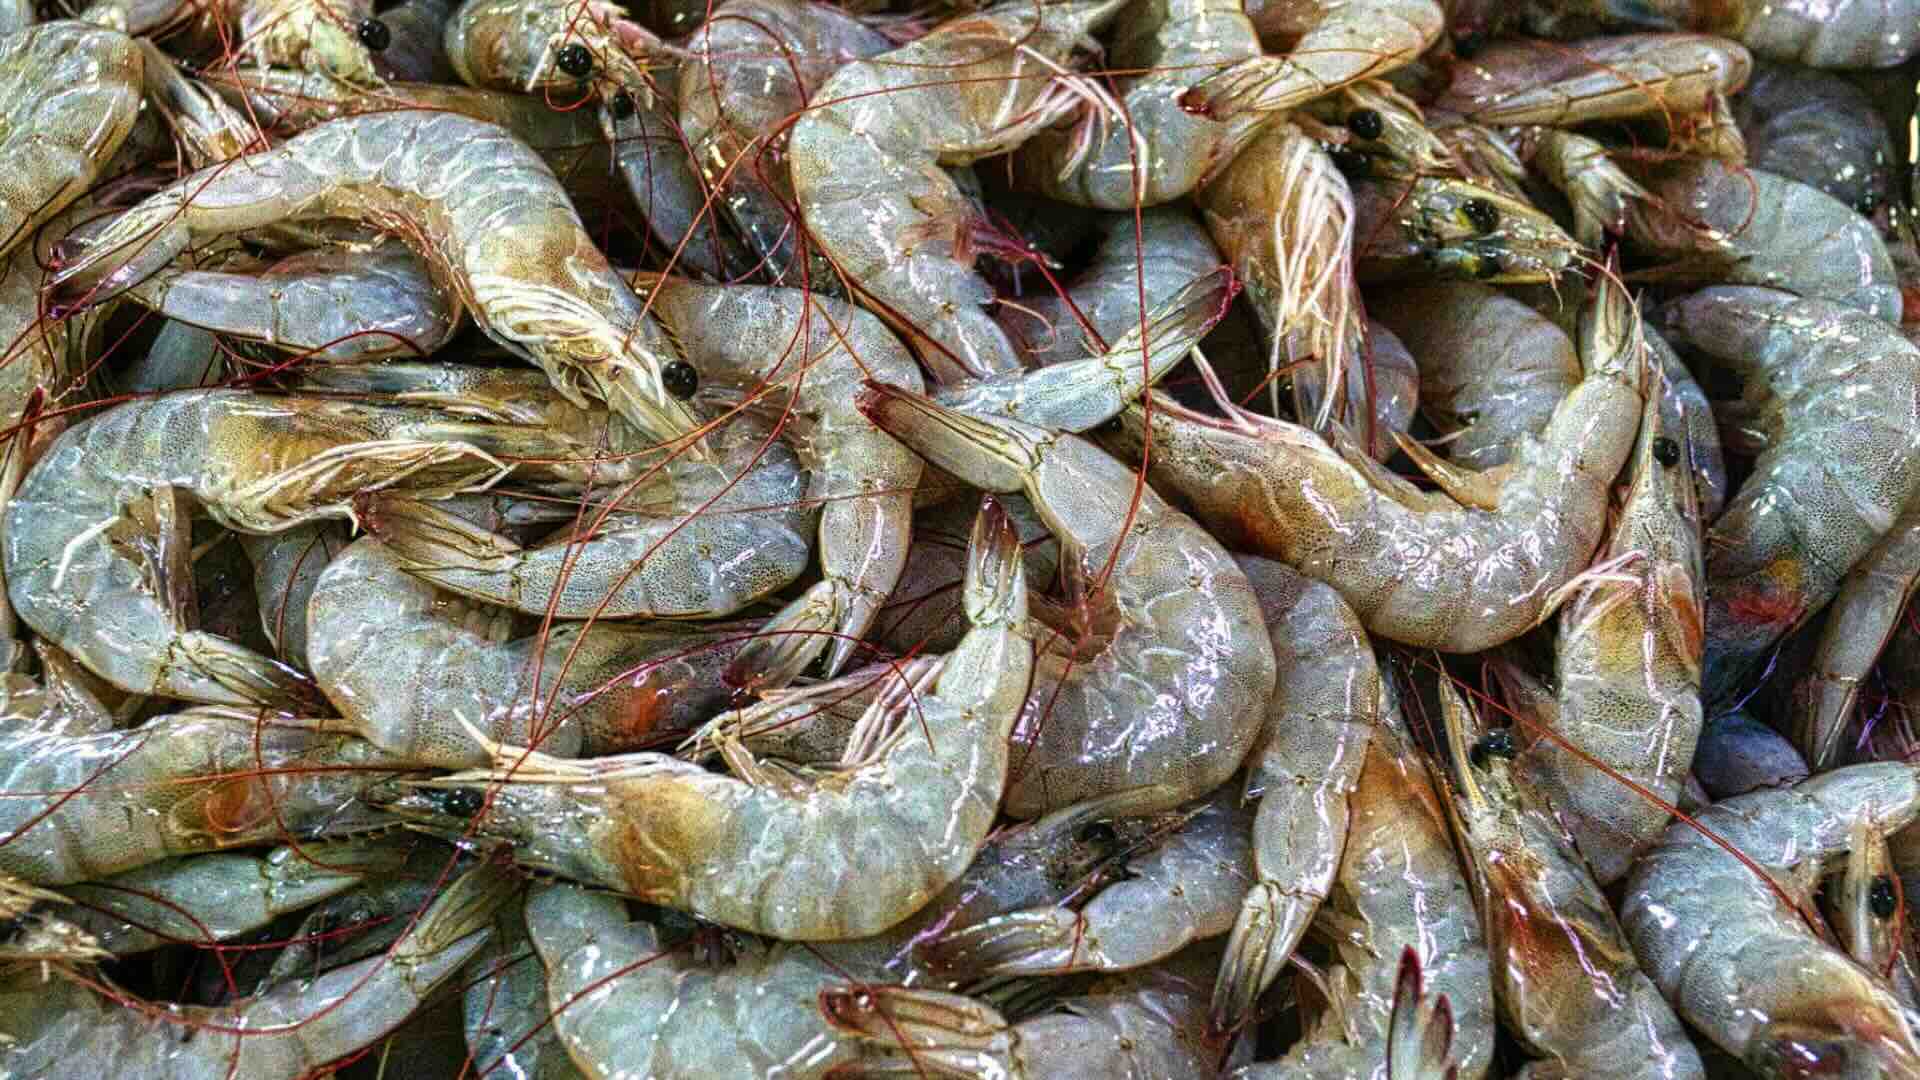 Prawn is a common name for small aquatic crustaceans with an exoskeleton and ten legs (members of the order of decapods), some of which are edible. The term prawn is used particularly in the United Kingdom, Ireland, and Commonwealth nations, for large swimming crustaceans or shrimp, especially those with commercial significance in the fishing industry. Shrimp in this category often belong to the suborder Dendrobranchiata. In North America, the term is used less frequently, typically for freshwater shrimp. The terms shrimp and prawn themselves lack scientific standing. Over the years, the way they are used has changed, and in contemporary usage, the terms are almost interchangeable.